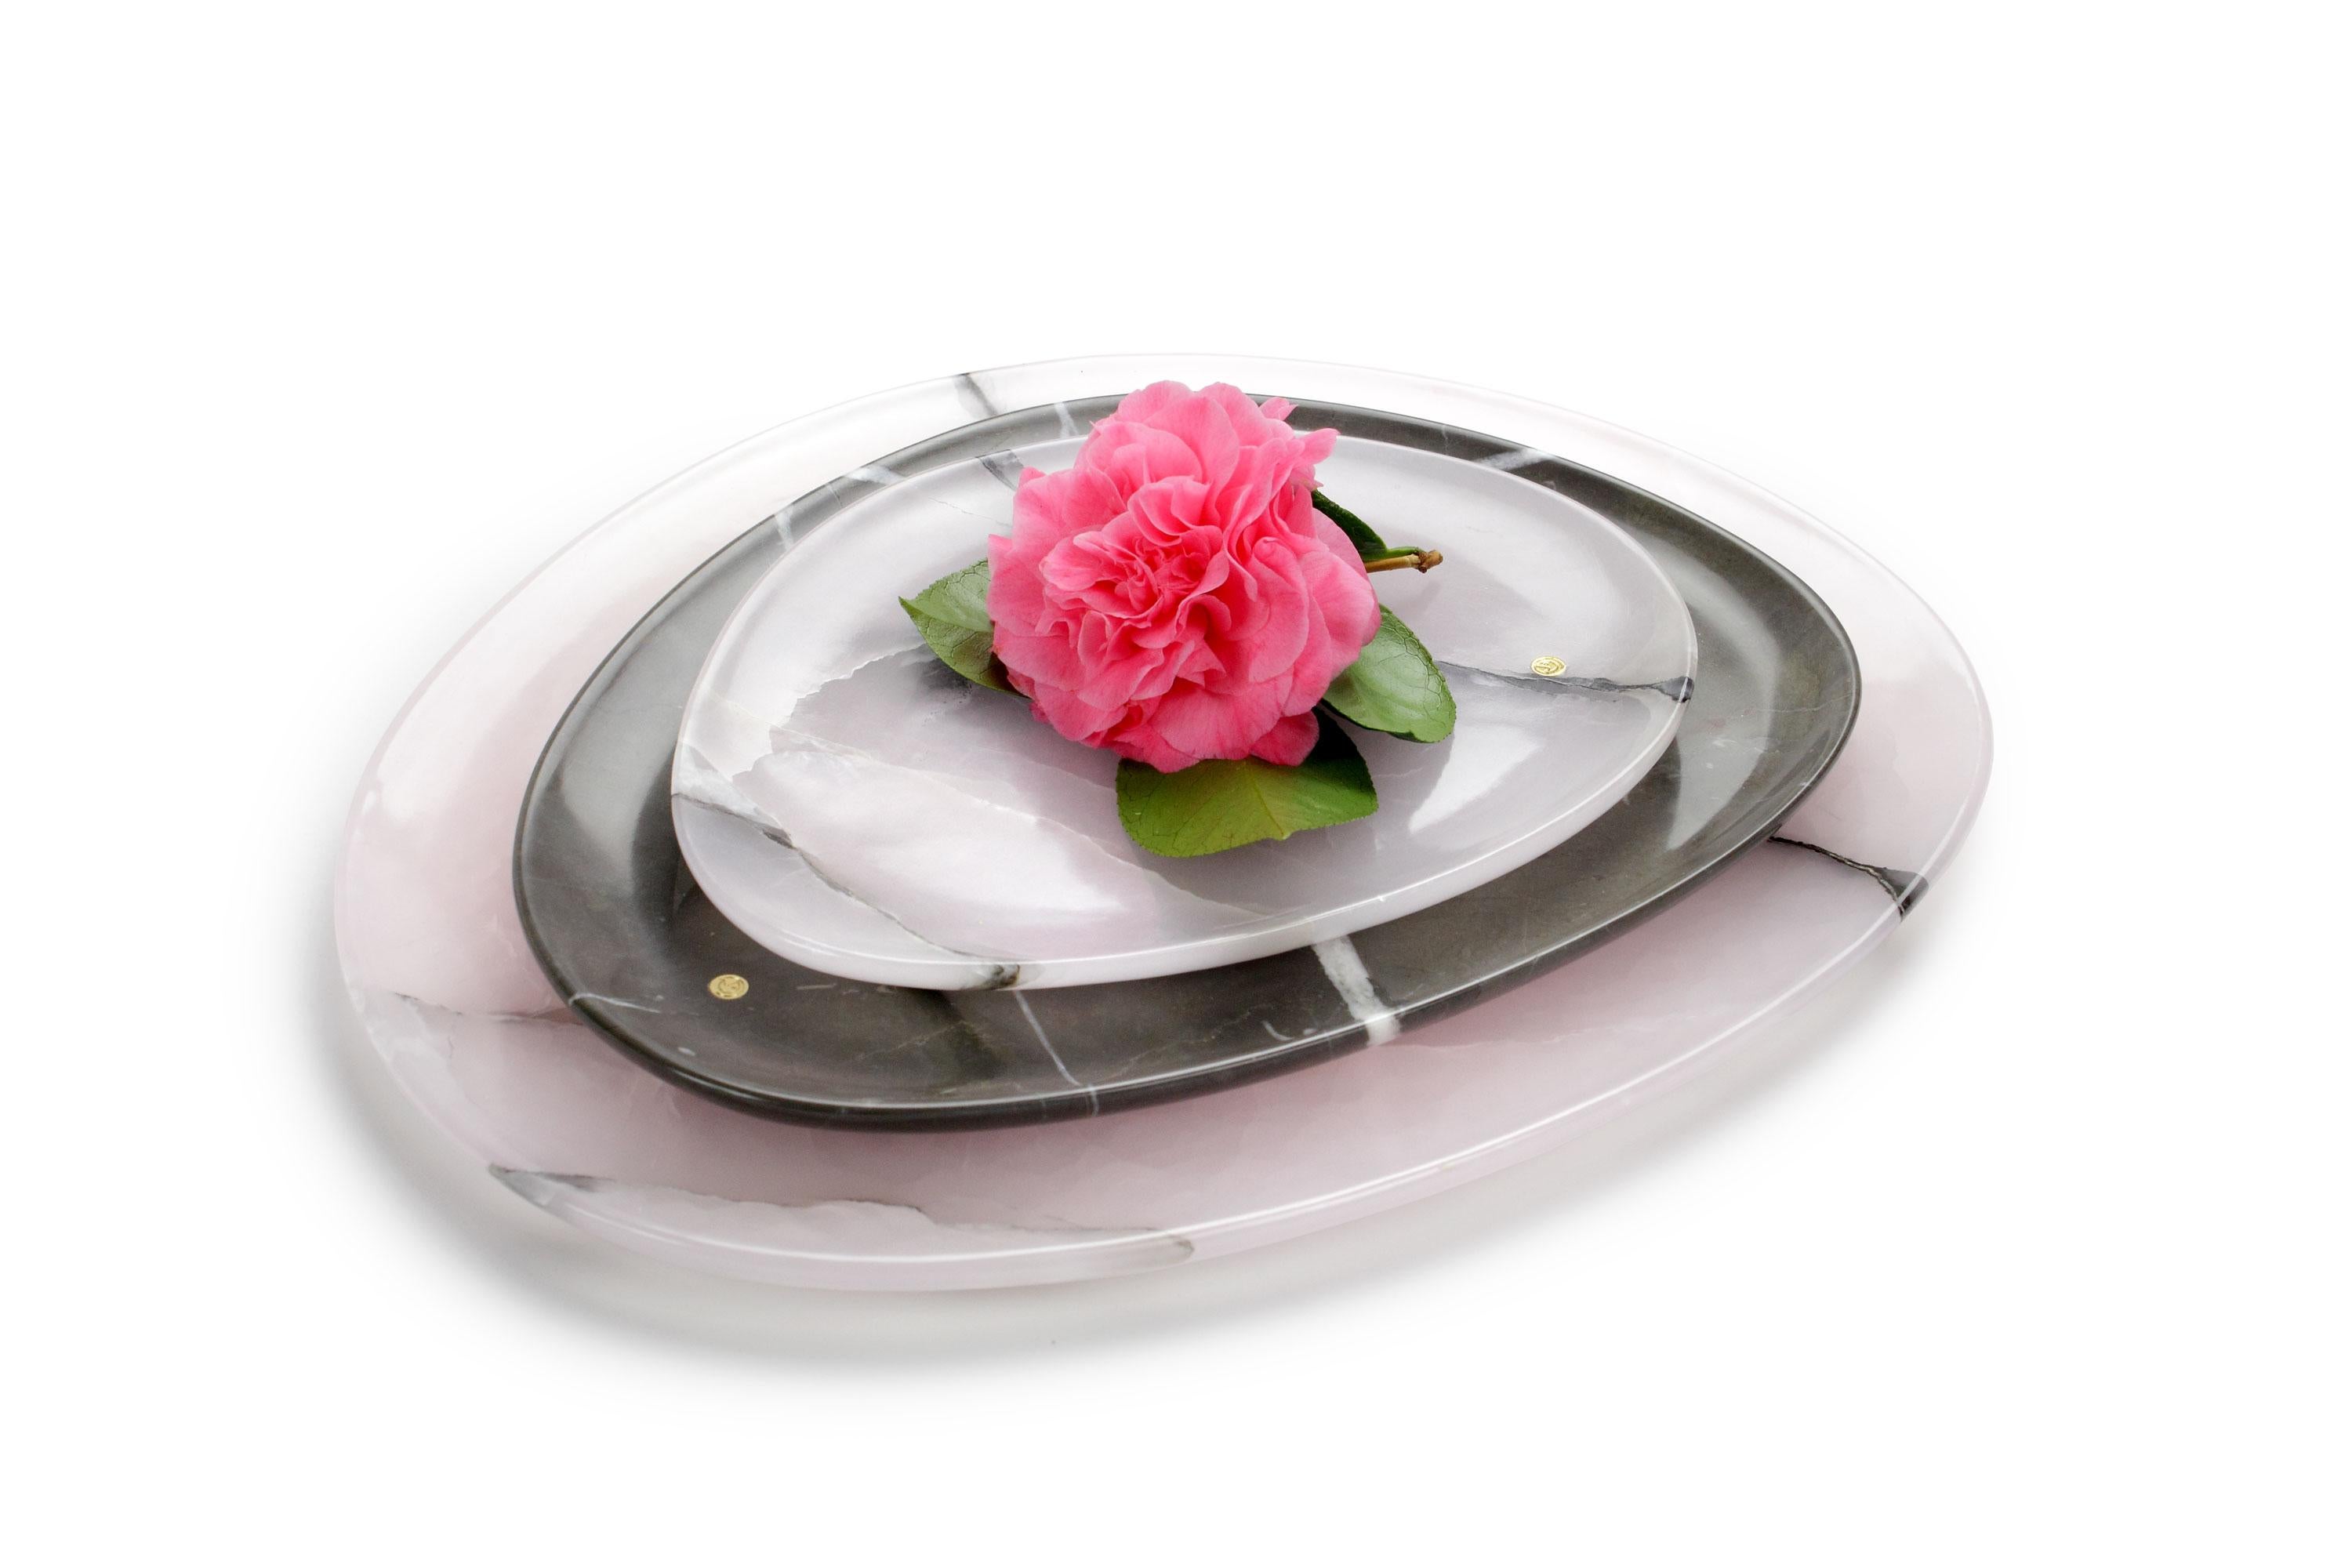 Hand carved presentation plates in pink onyx and imperial grey marble. 
Multiple use as plates, platters and placers. 

Dimensions: Small - L24 W20 H1.8 cm, Medium - L30 W28 H1.8 cm, Big - L36 W35 H1.8 cm.
Available in different marbles, onyx and